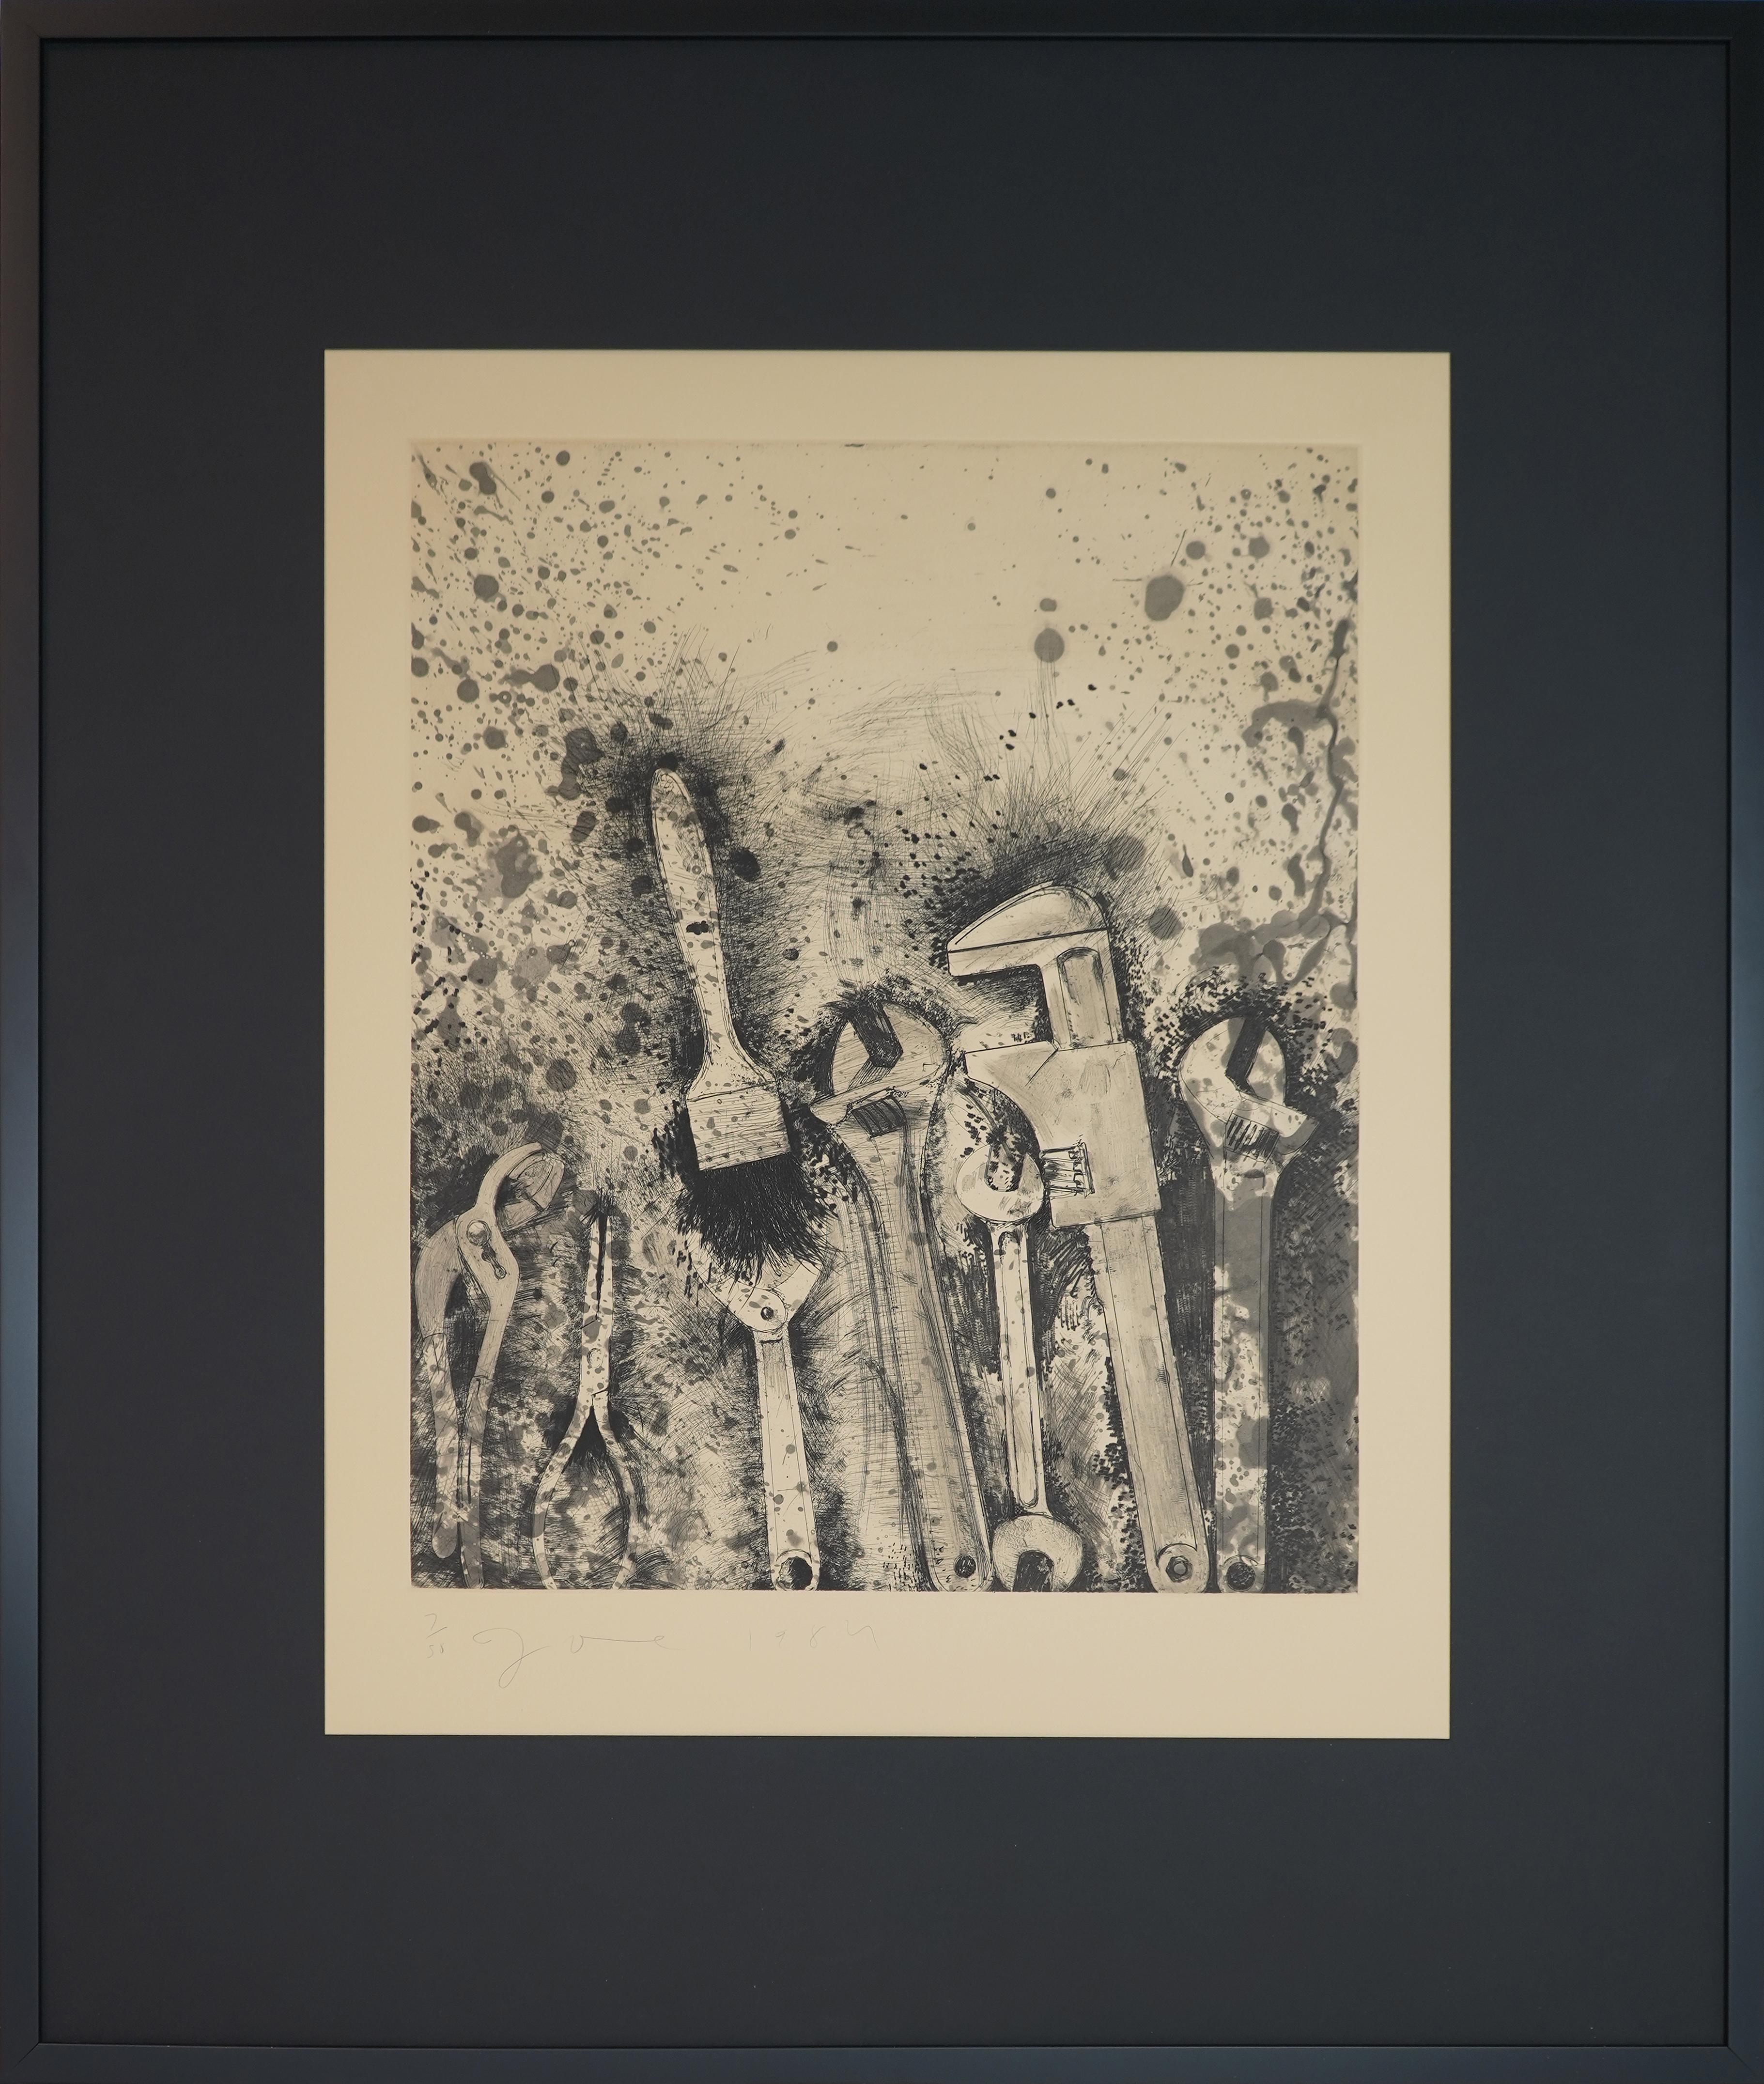 Jim Dine Abstract Print - The New French Tools 3 (For Pep)